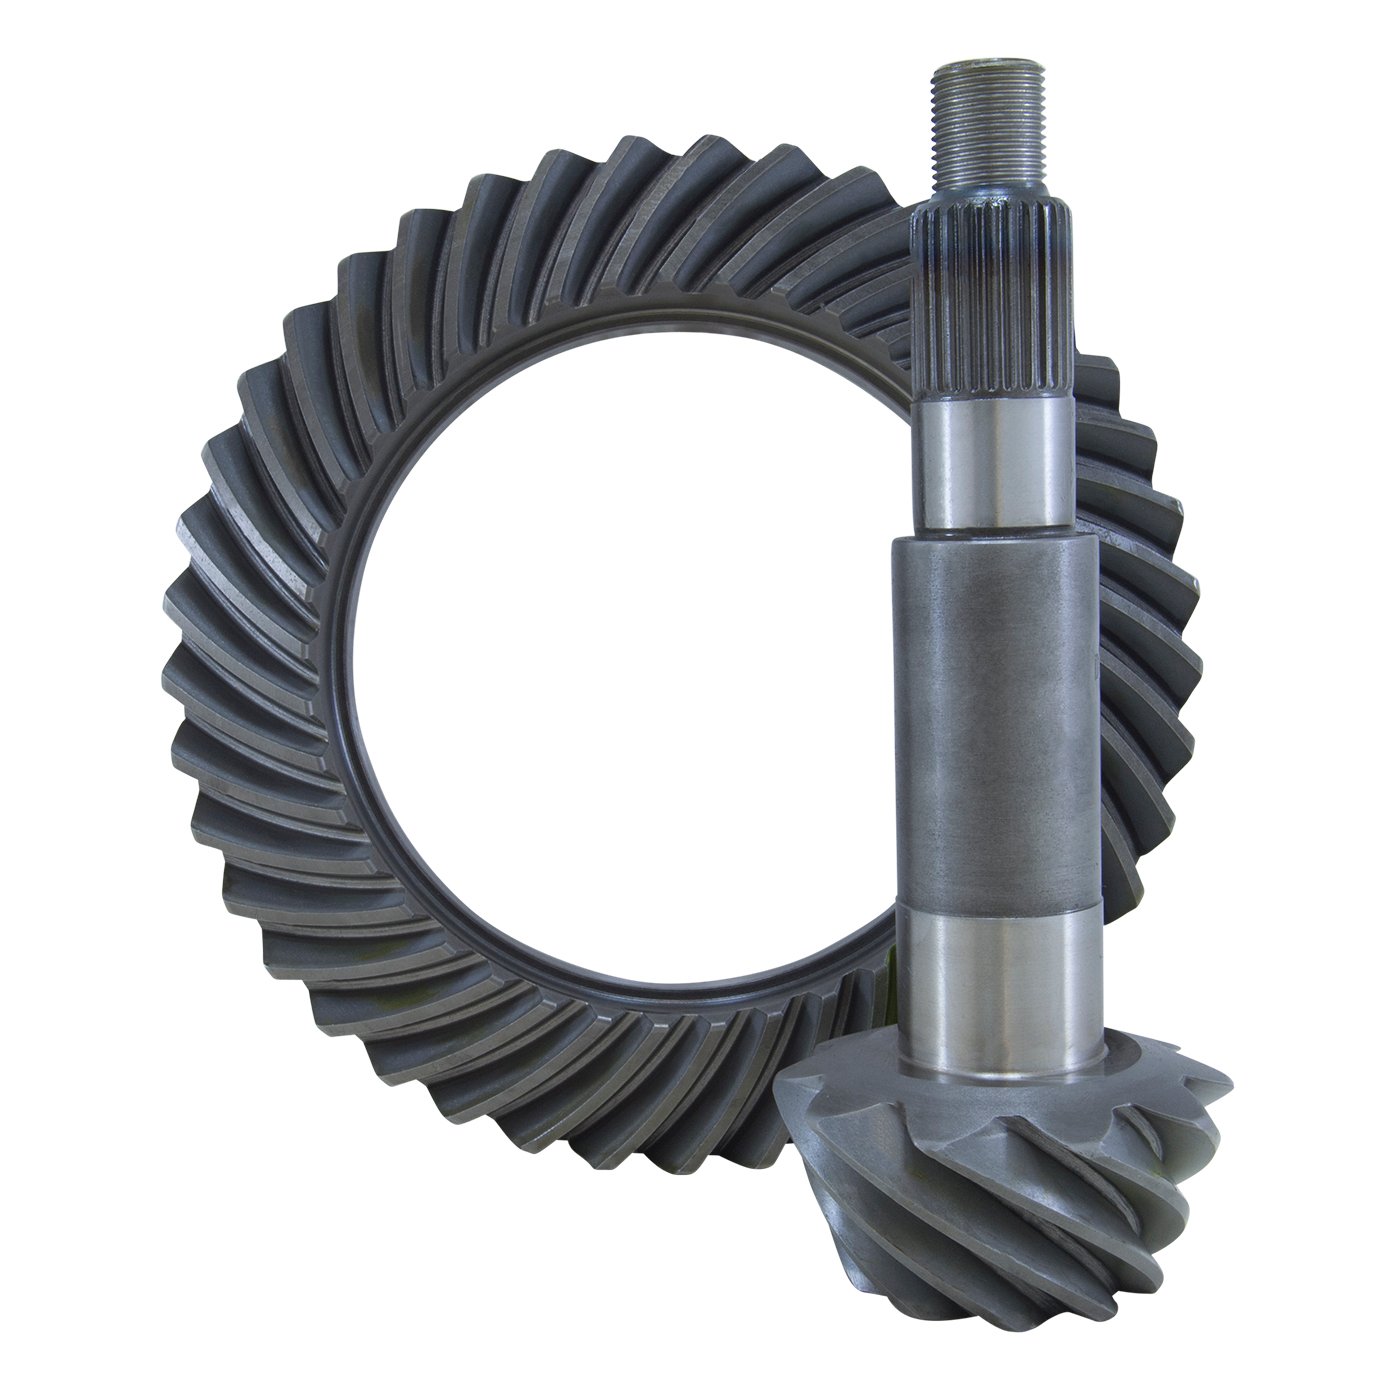 USA Standard ZG D60-538 Replacement Ring & Pinion Gear Set, For Dana 60, 5.38 Ratio